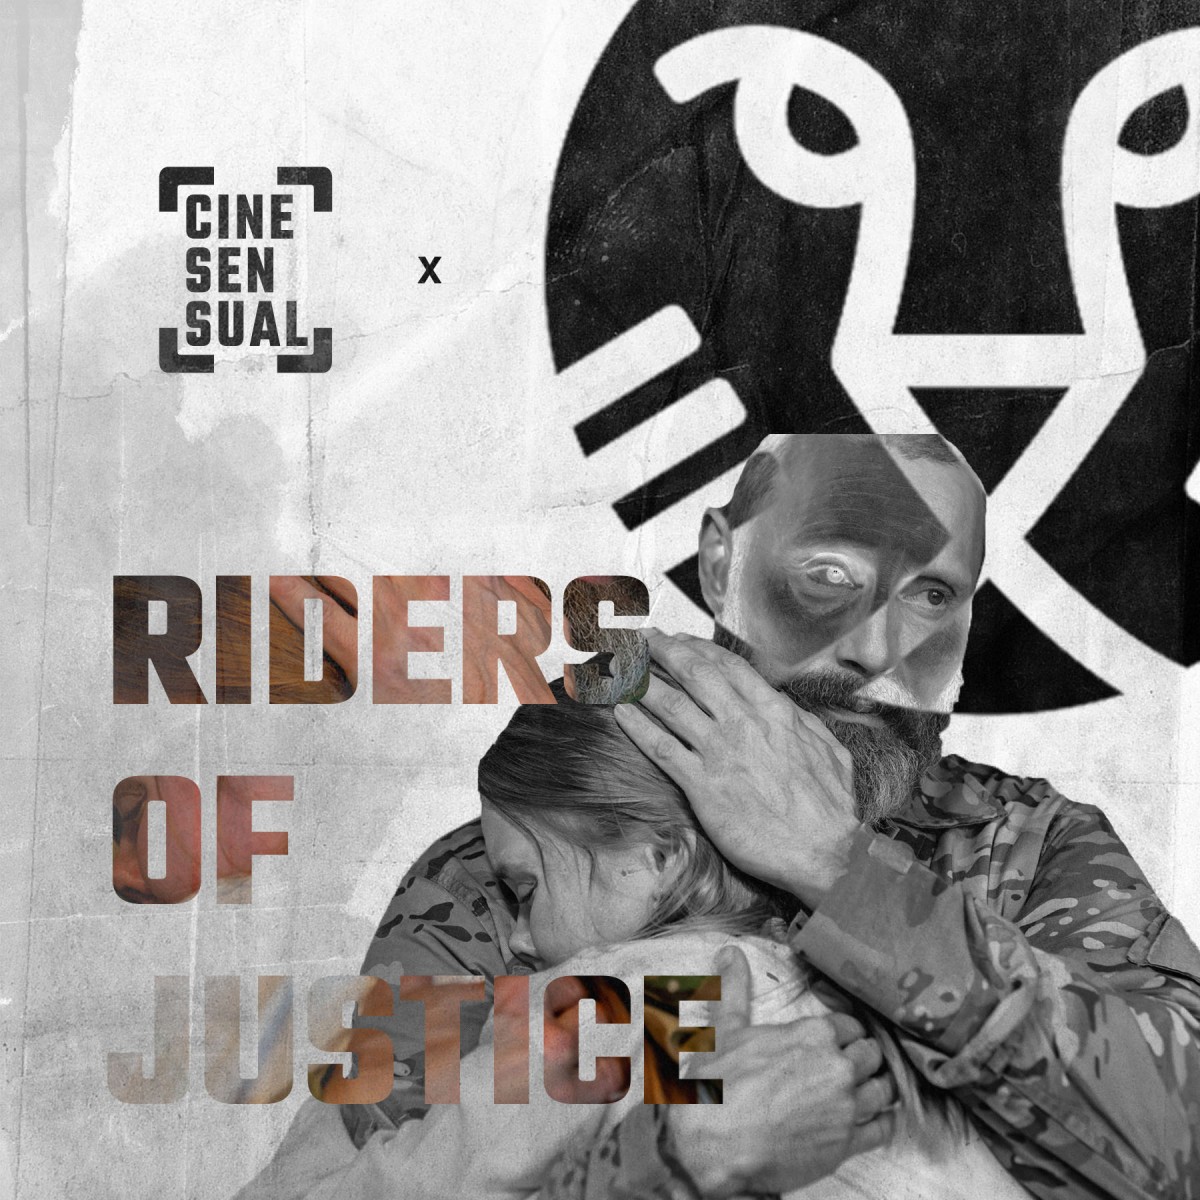 Riders of Justice review